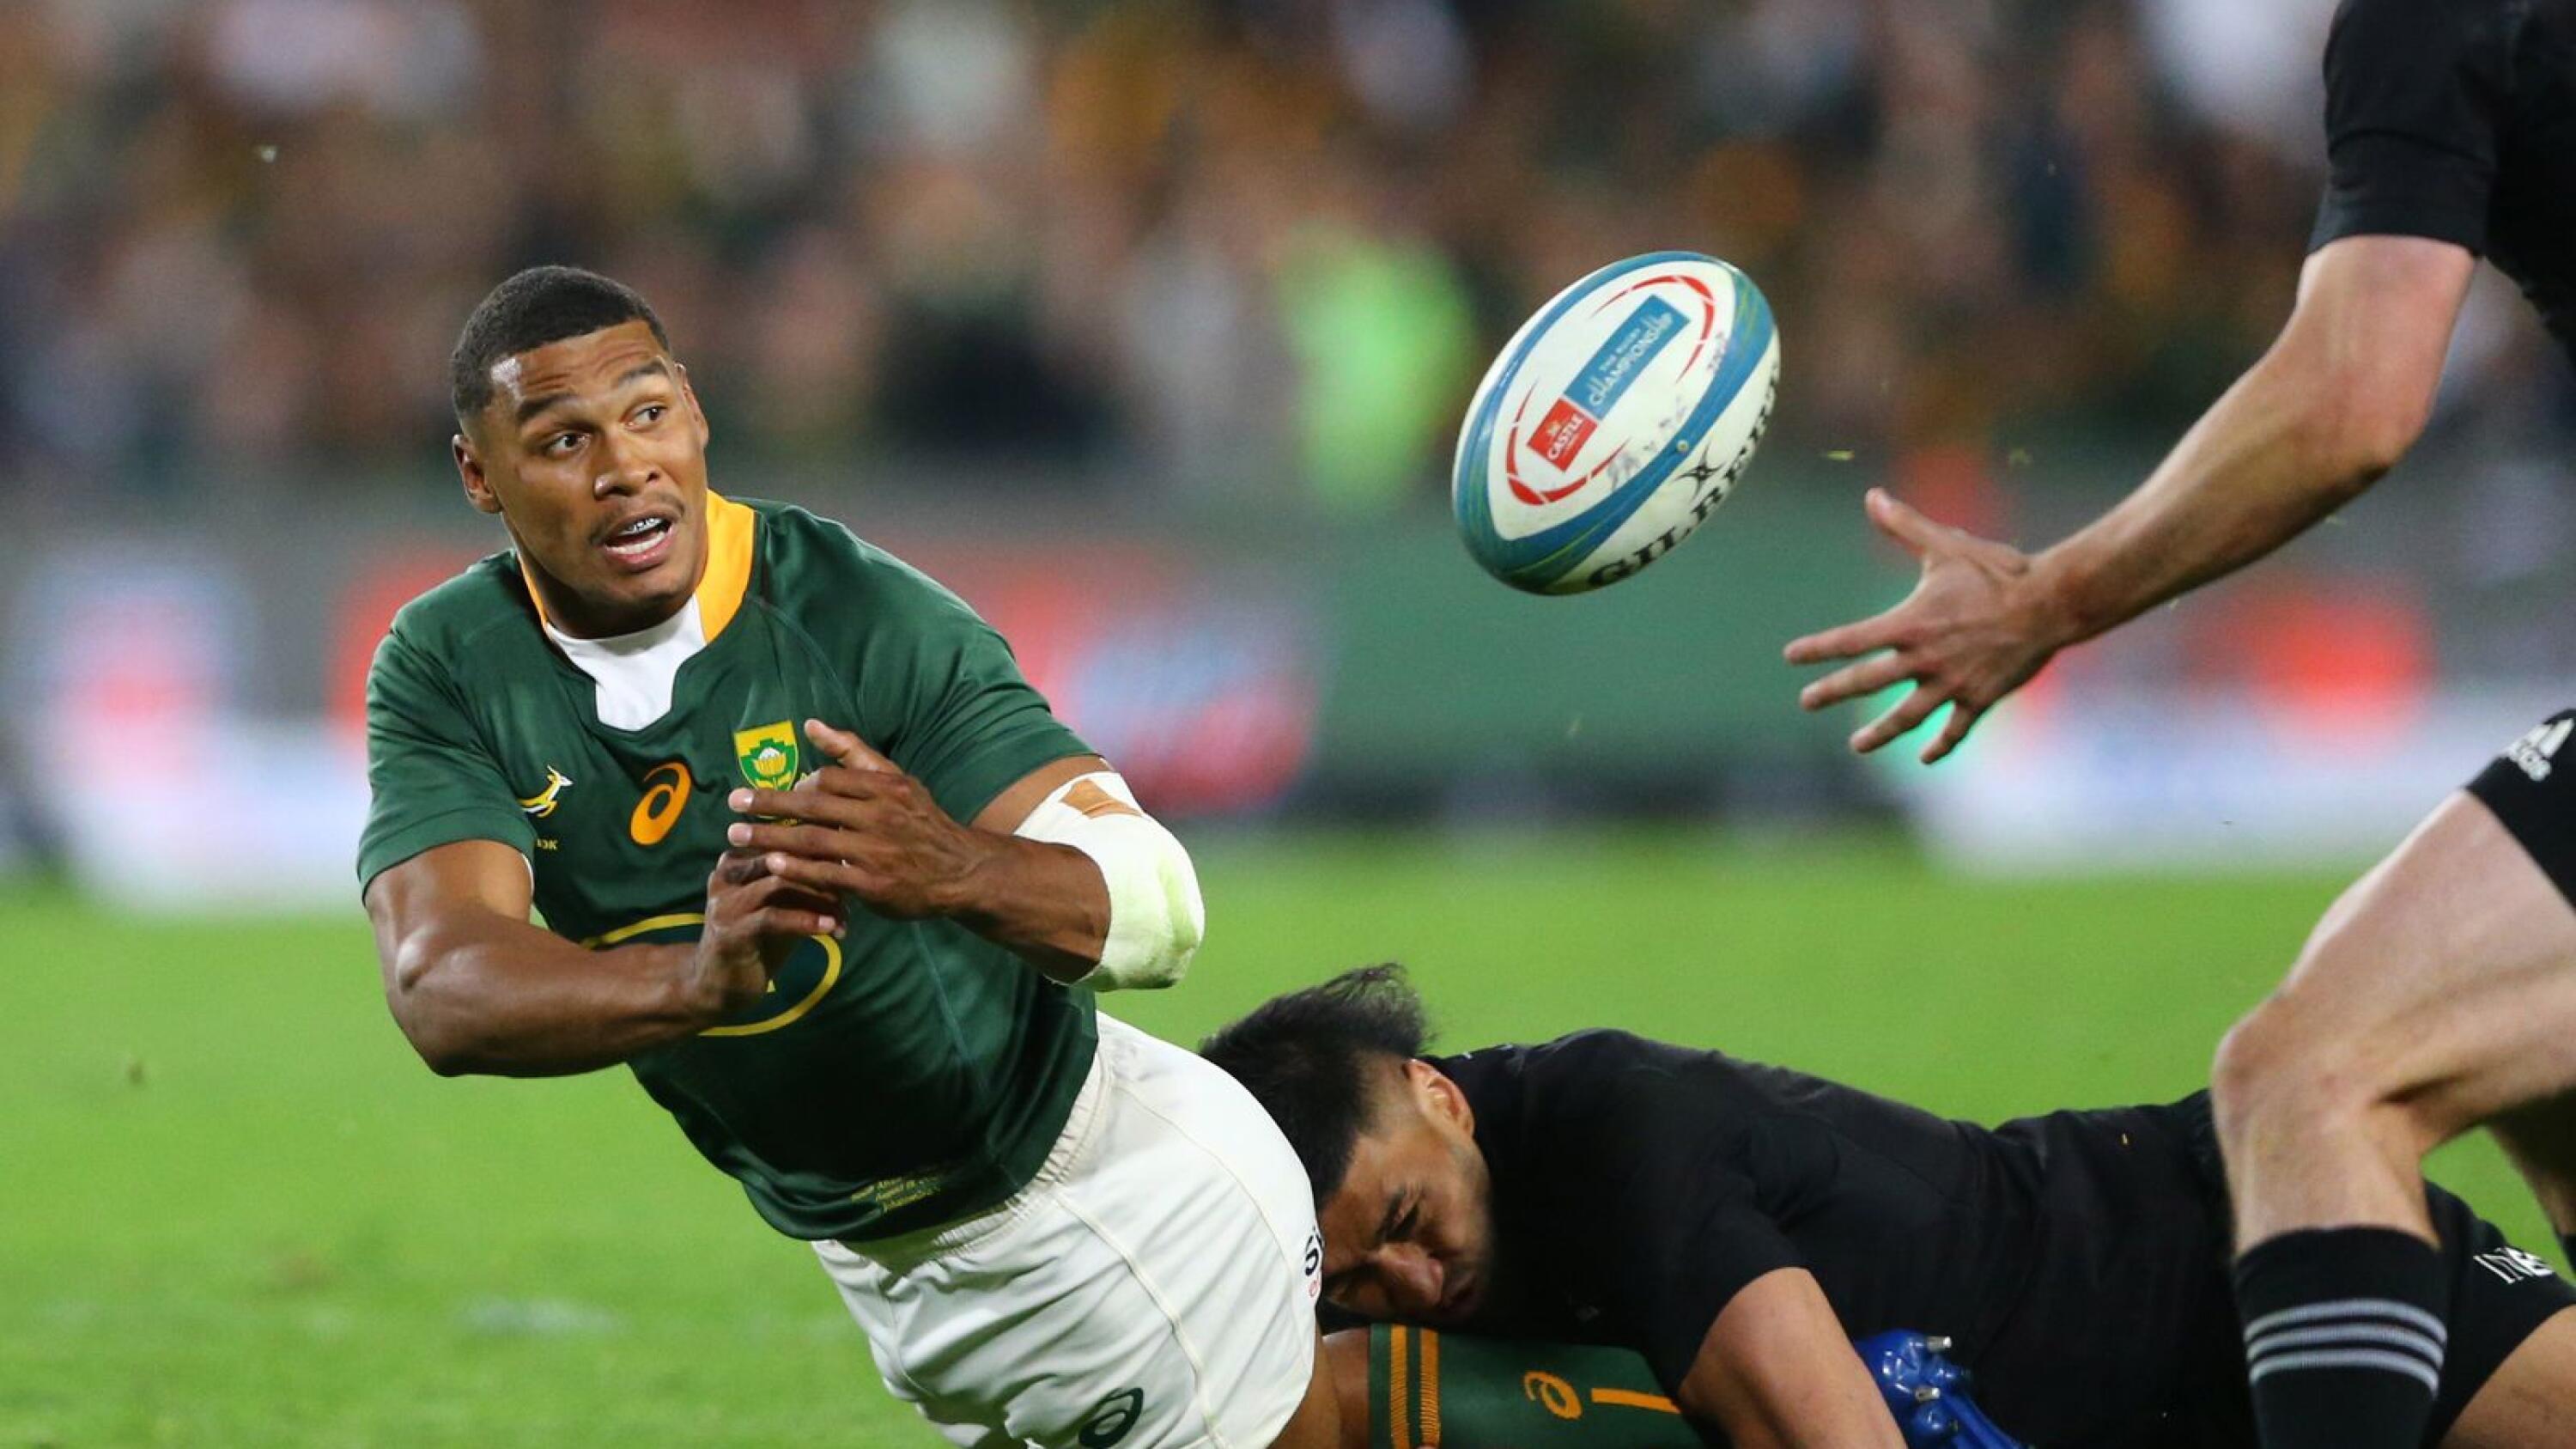 Damian Willemse has been in fine form for the Springboks, all over the backline